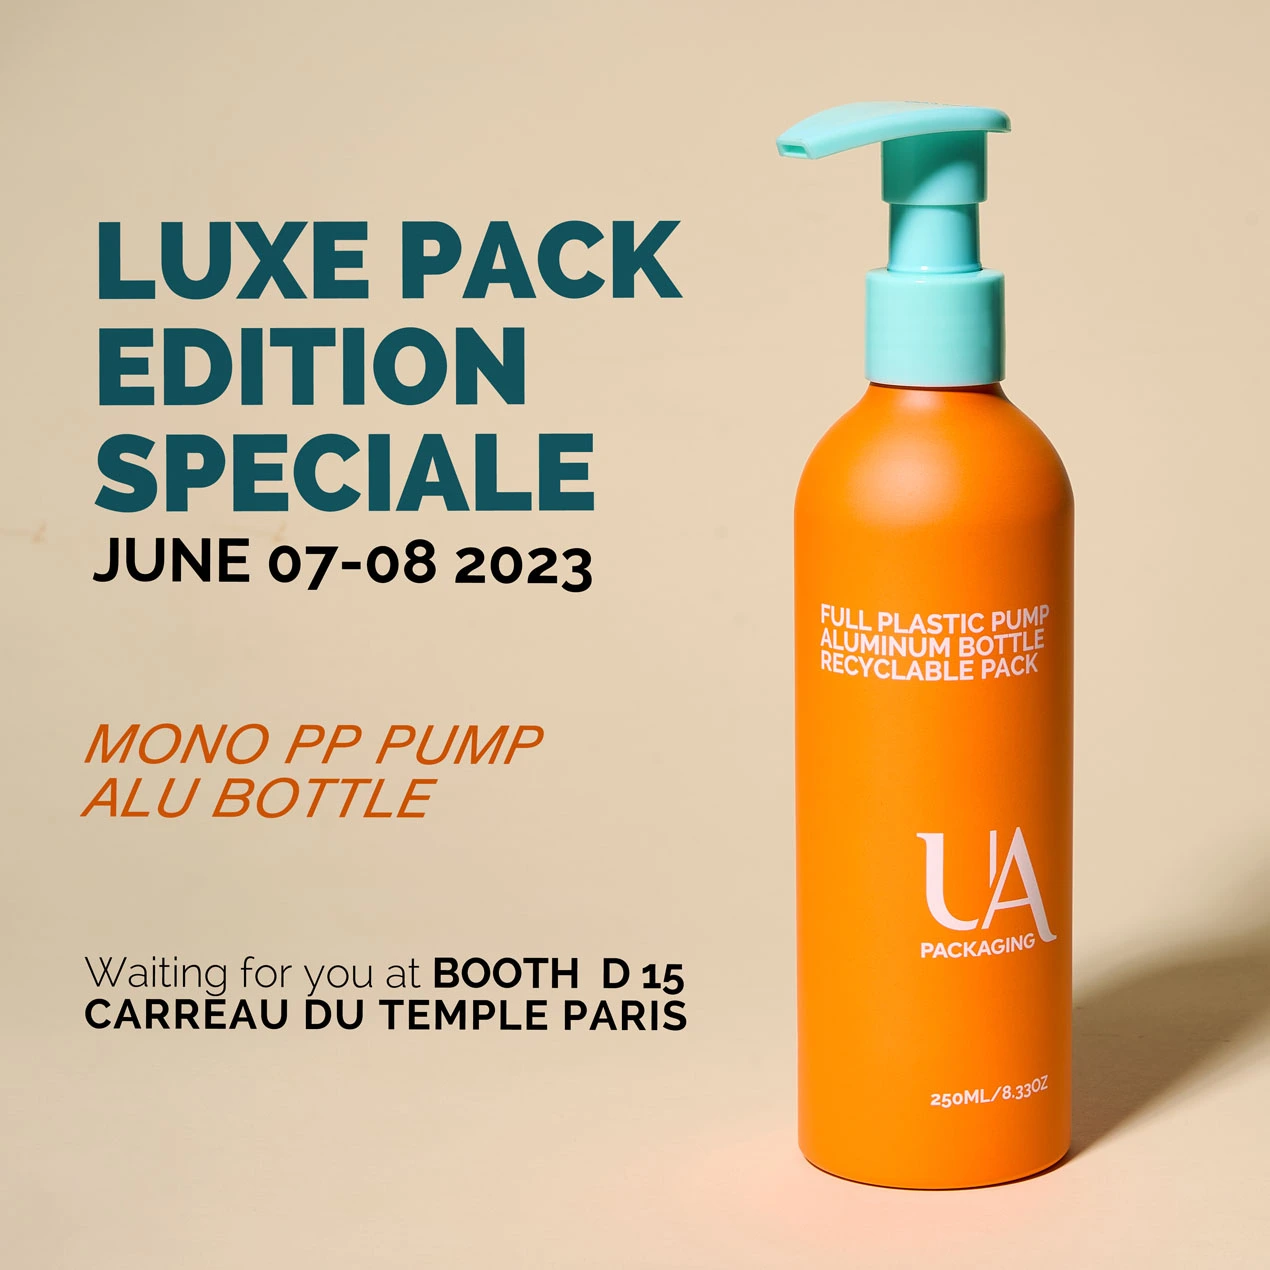 EVENT in 2023, LUXEPACK SPECIAL EDITION in Paris